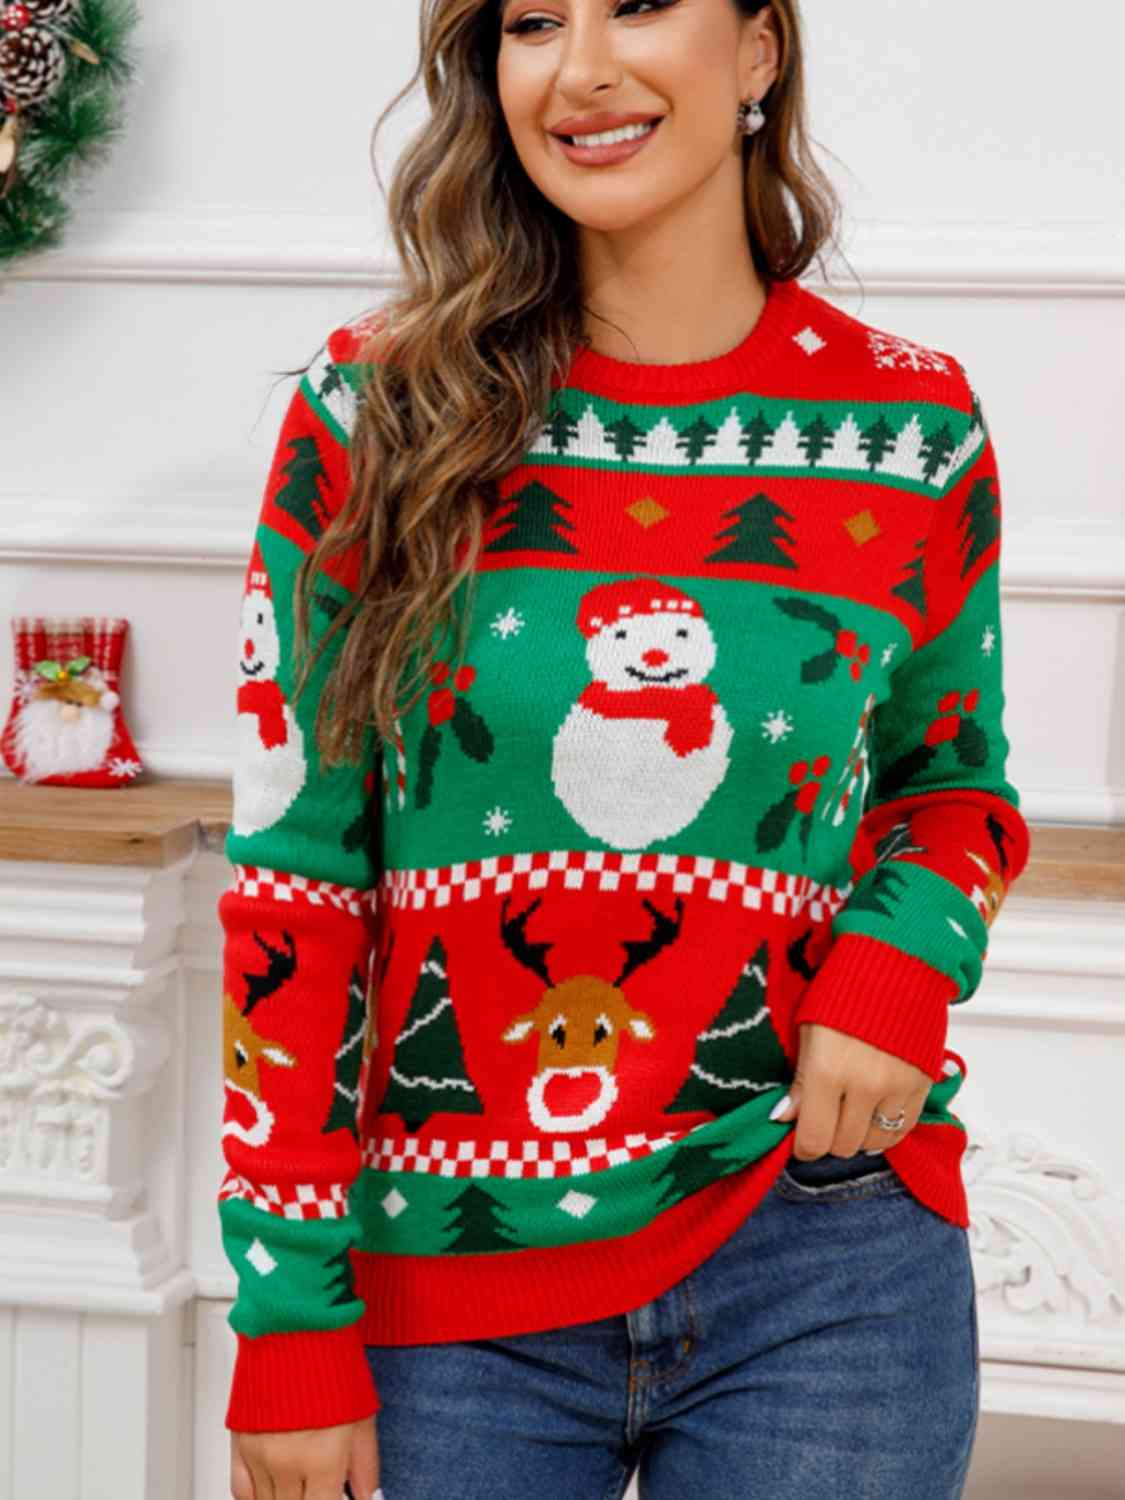 Snowman Reindeer Bold Colorful Knit Round Neck Christmas Holiday Winter Sweater